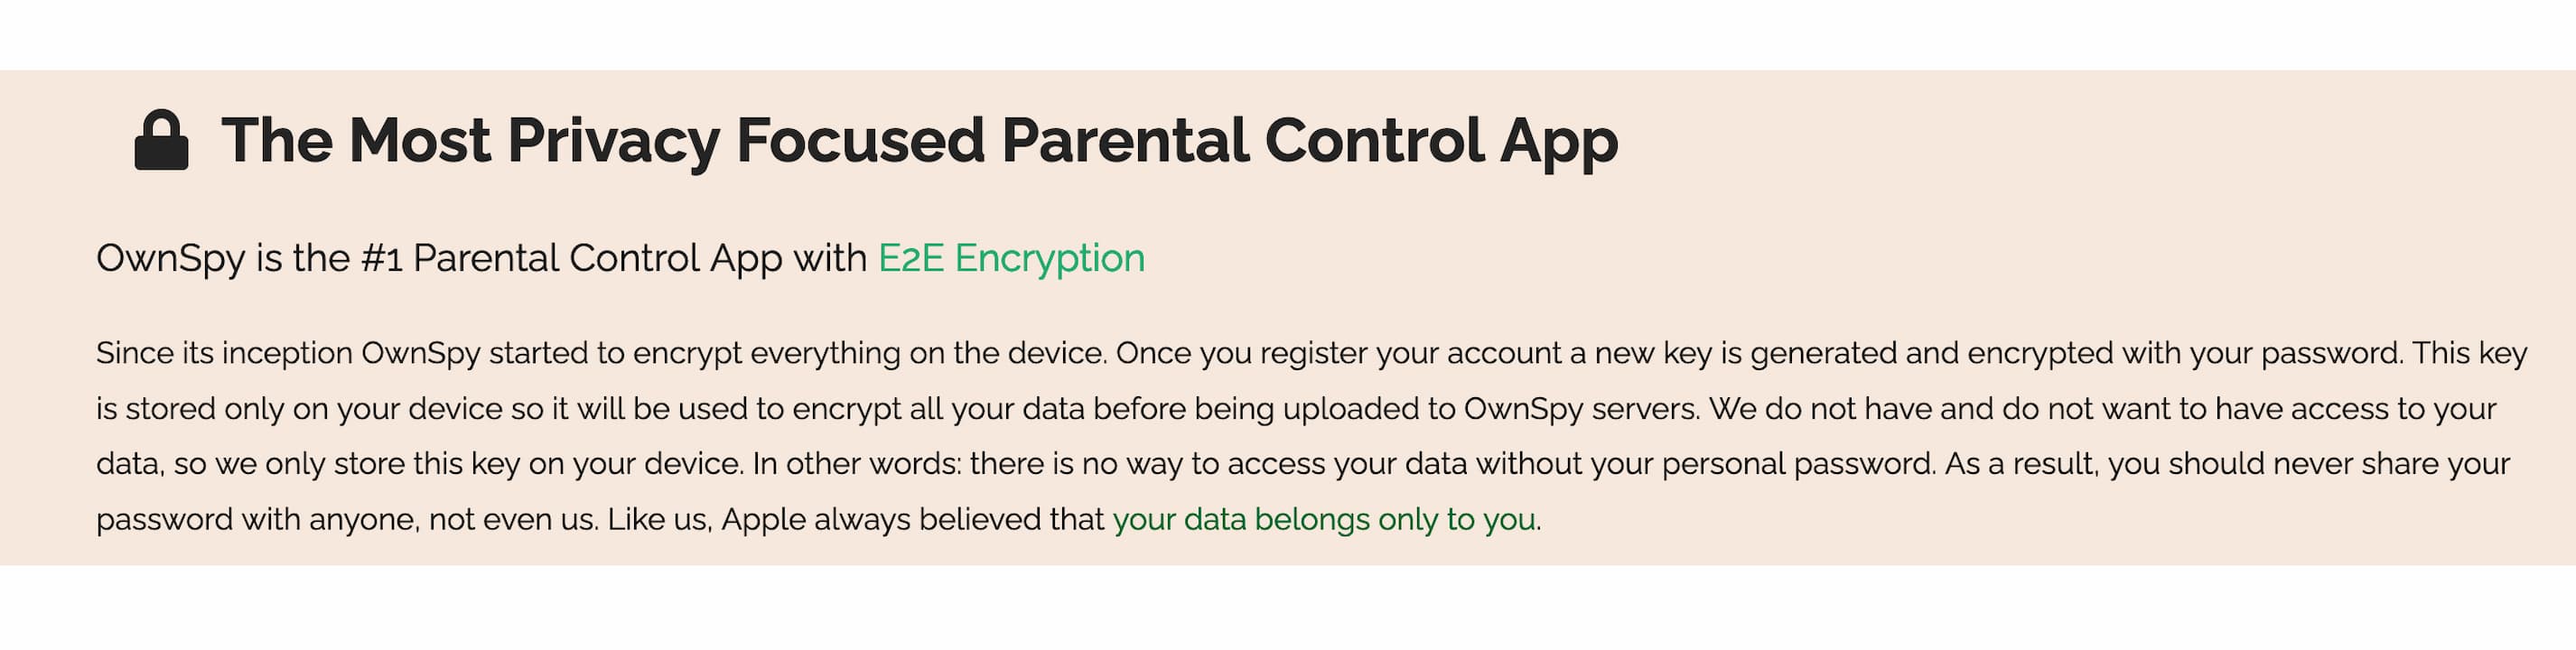 a text box on a landing page reading: The Most Privacy Focused Parental Control App. OwnSpy is the #1 Parental Control App with E2E Encryption. Since its inception OwnSpy started to encrypt everything on the device. Once you register your account a new key is generated and encrypted with your password. This key is stored only on your device so it will be used to encrypt all your data before being uploaded to OwnSpy servers. We do not have and do not want to have access to your data, so we only store this key on your device. In other words: there is no way to access your data without your personal password. As a result, you should never share your password with anyone, not even us. Like us, Apple always believed that your data belongs only to you.